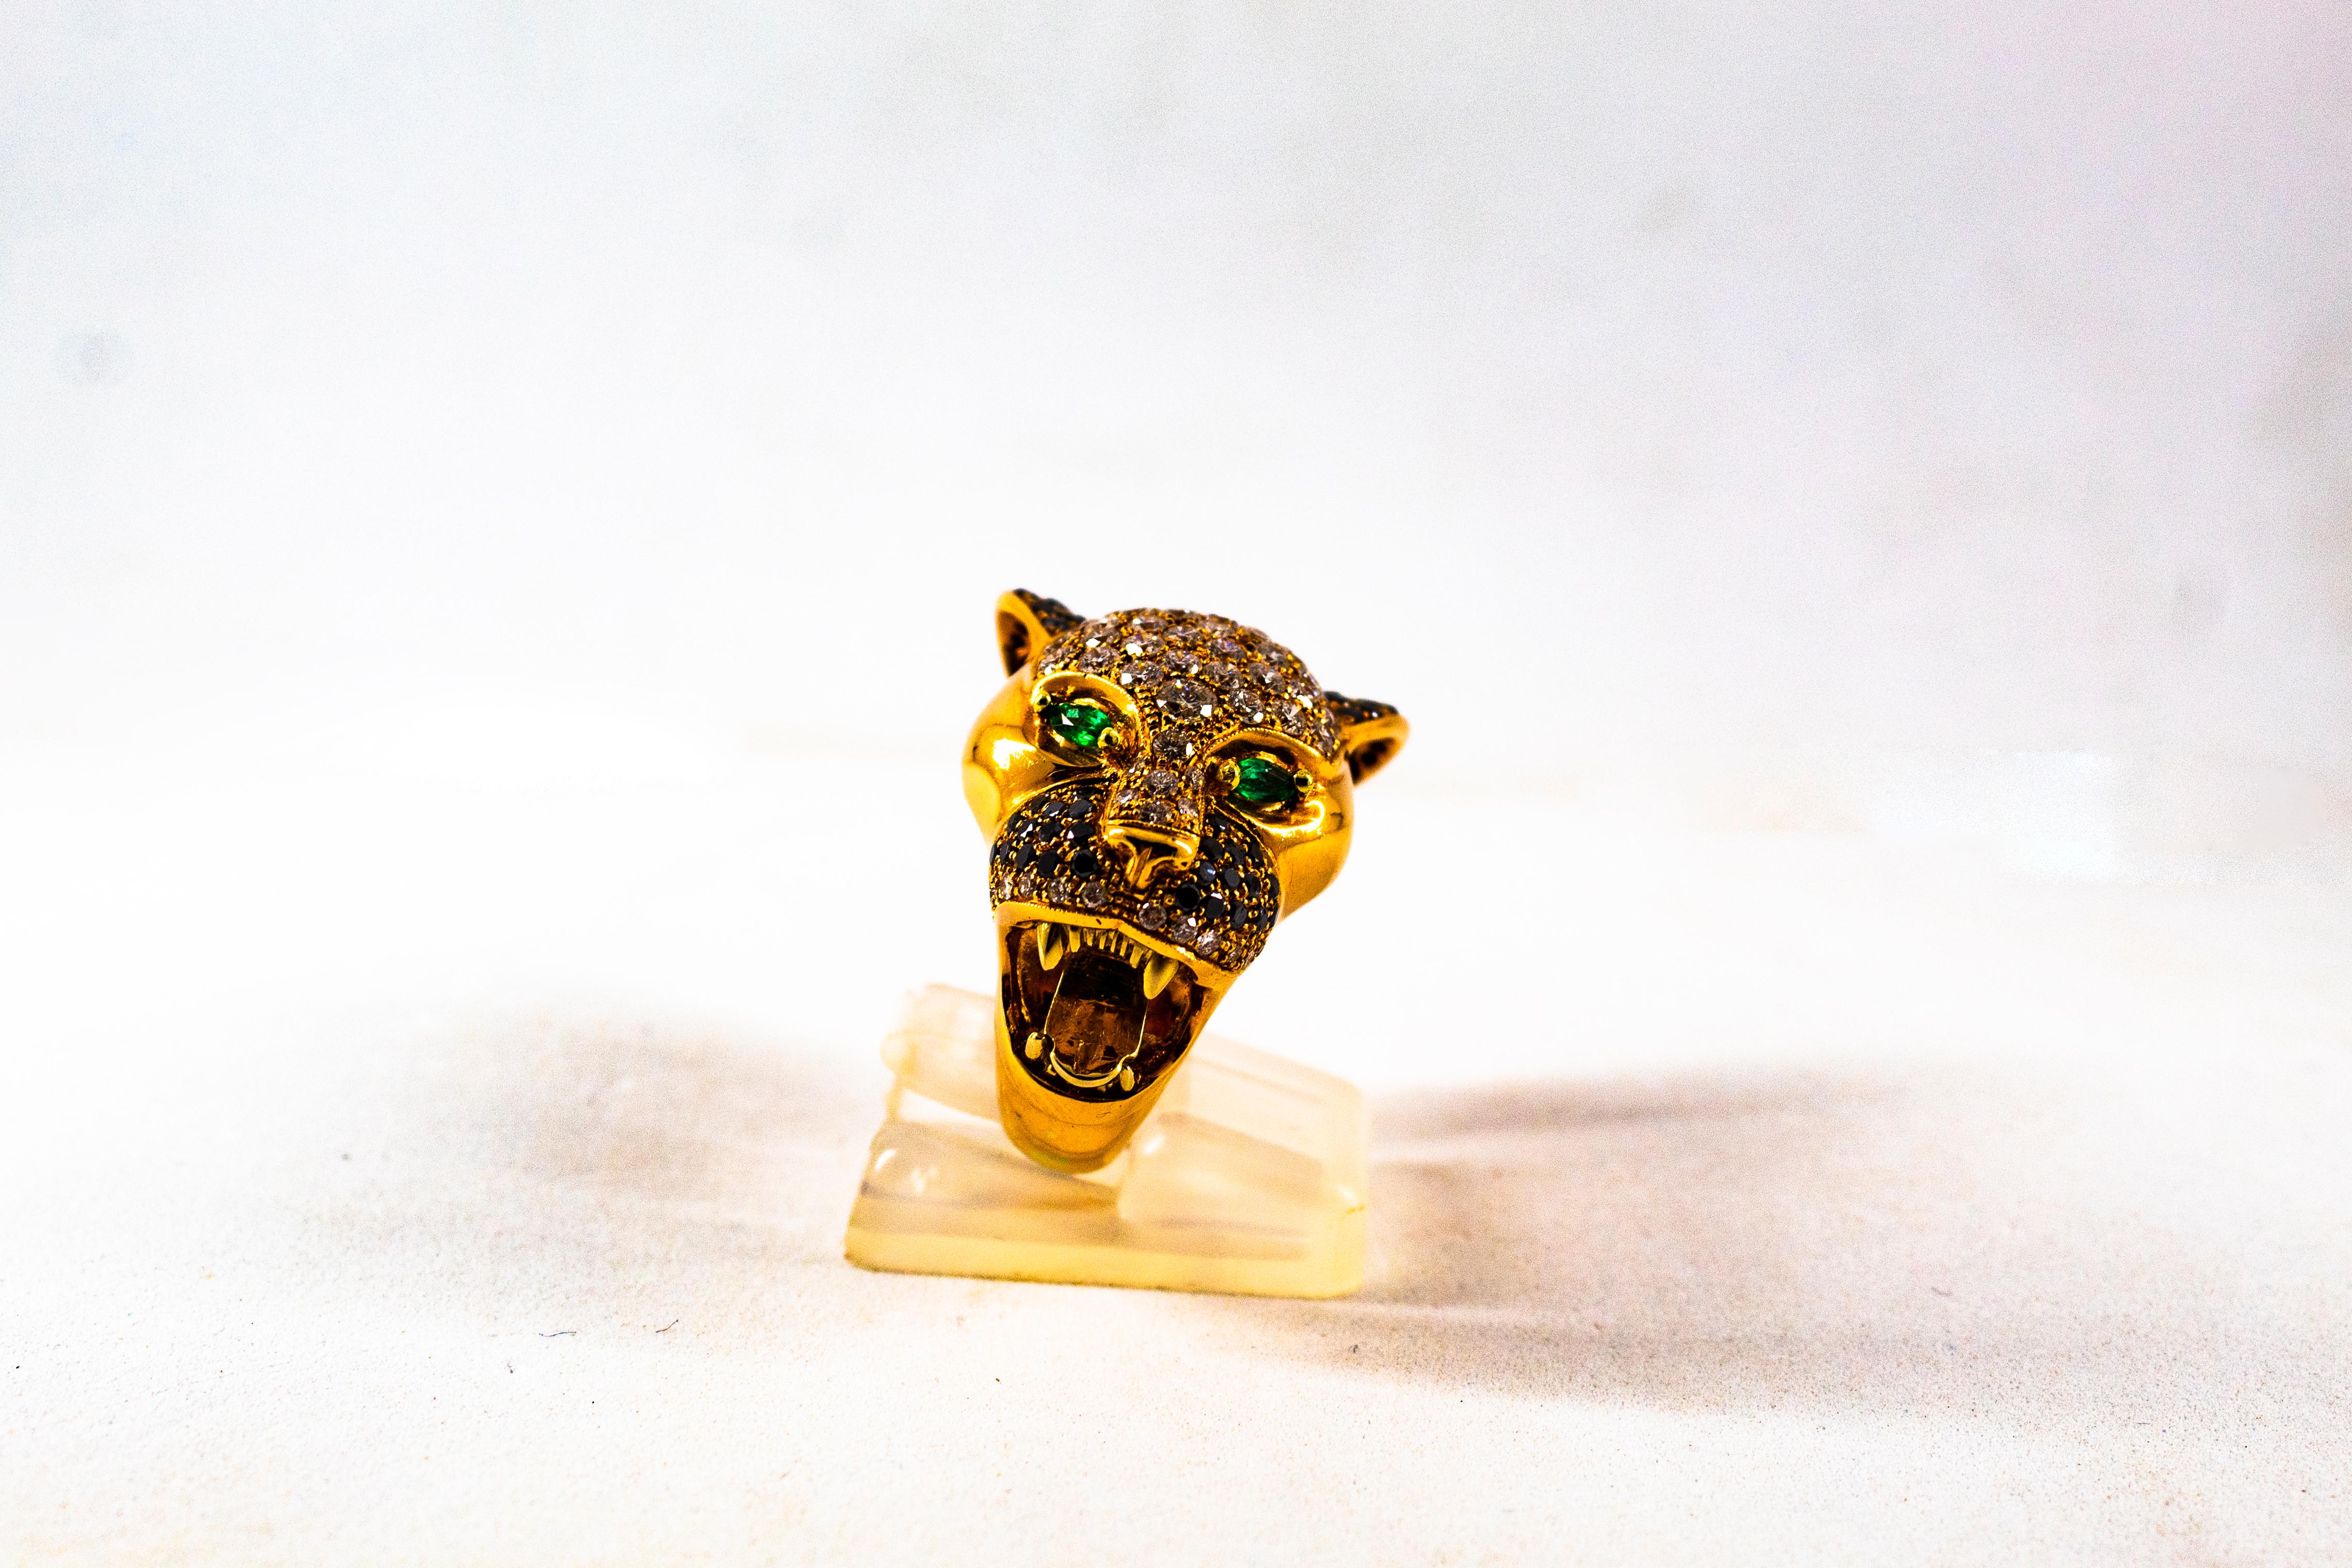 This Ring is made of 14K Yellow Gold.
This Ring has 2.90 Carats of White Modern Round Cut Diamonds.
This Ring has 0.60 Carats of Black Modern Round Cut Diamonds.
This Ring has 0.20 Carats of Emeralds.
Size ITA: 15 USA: 7 1/4

We're a workshop so